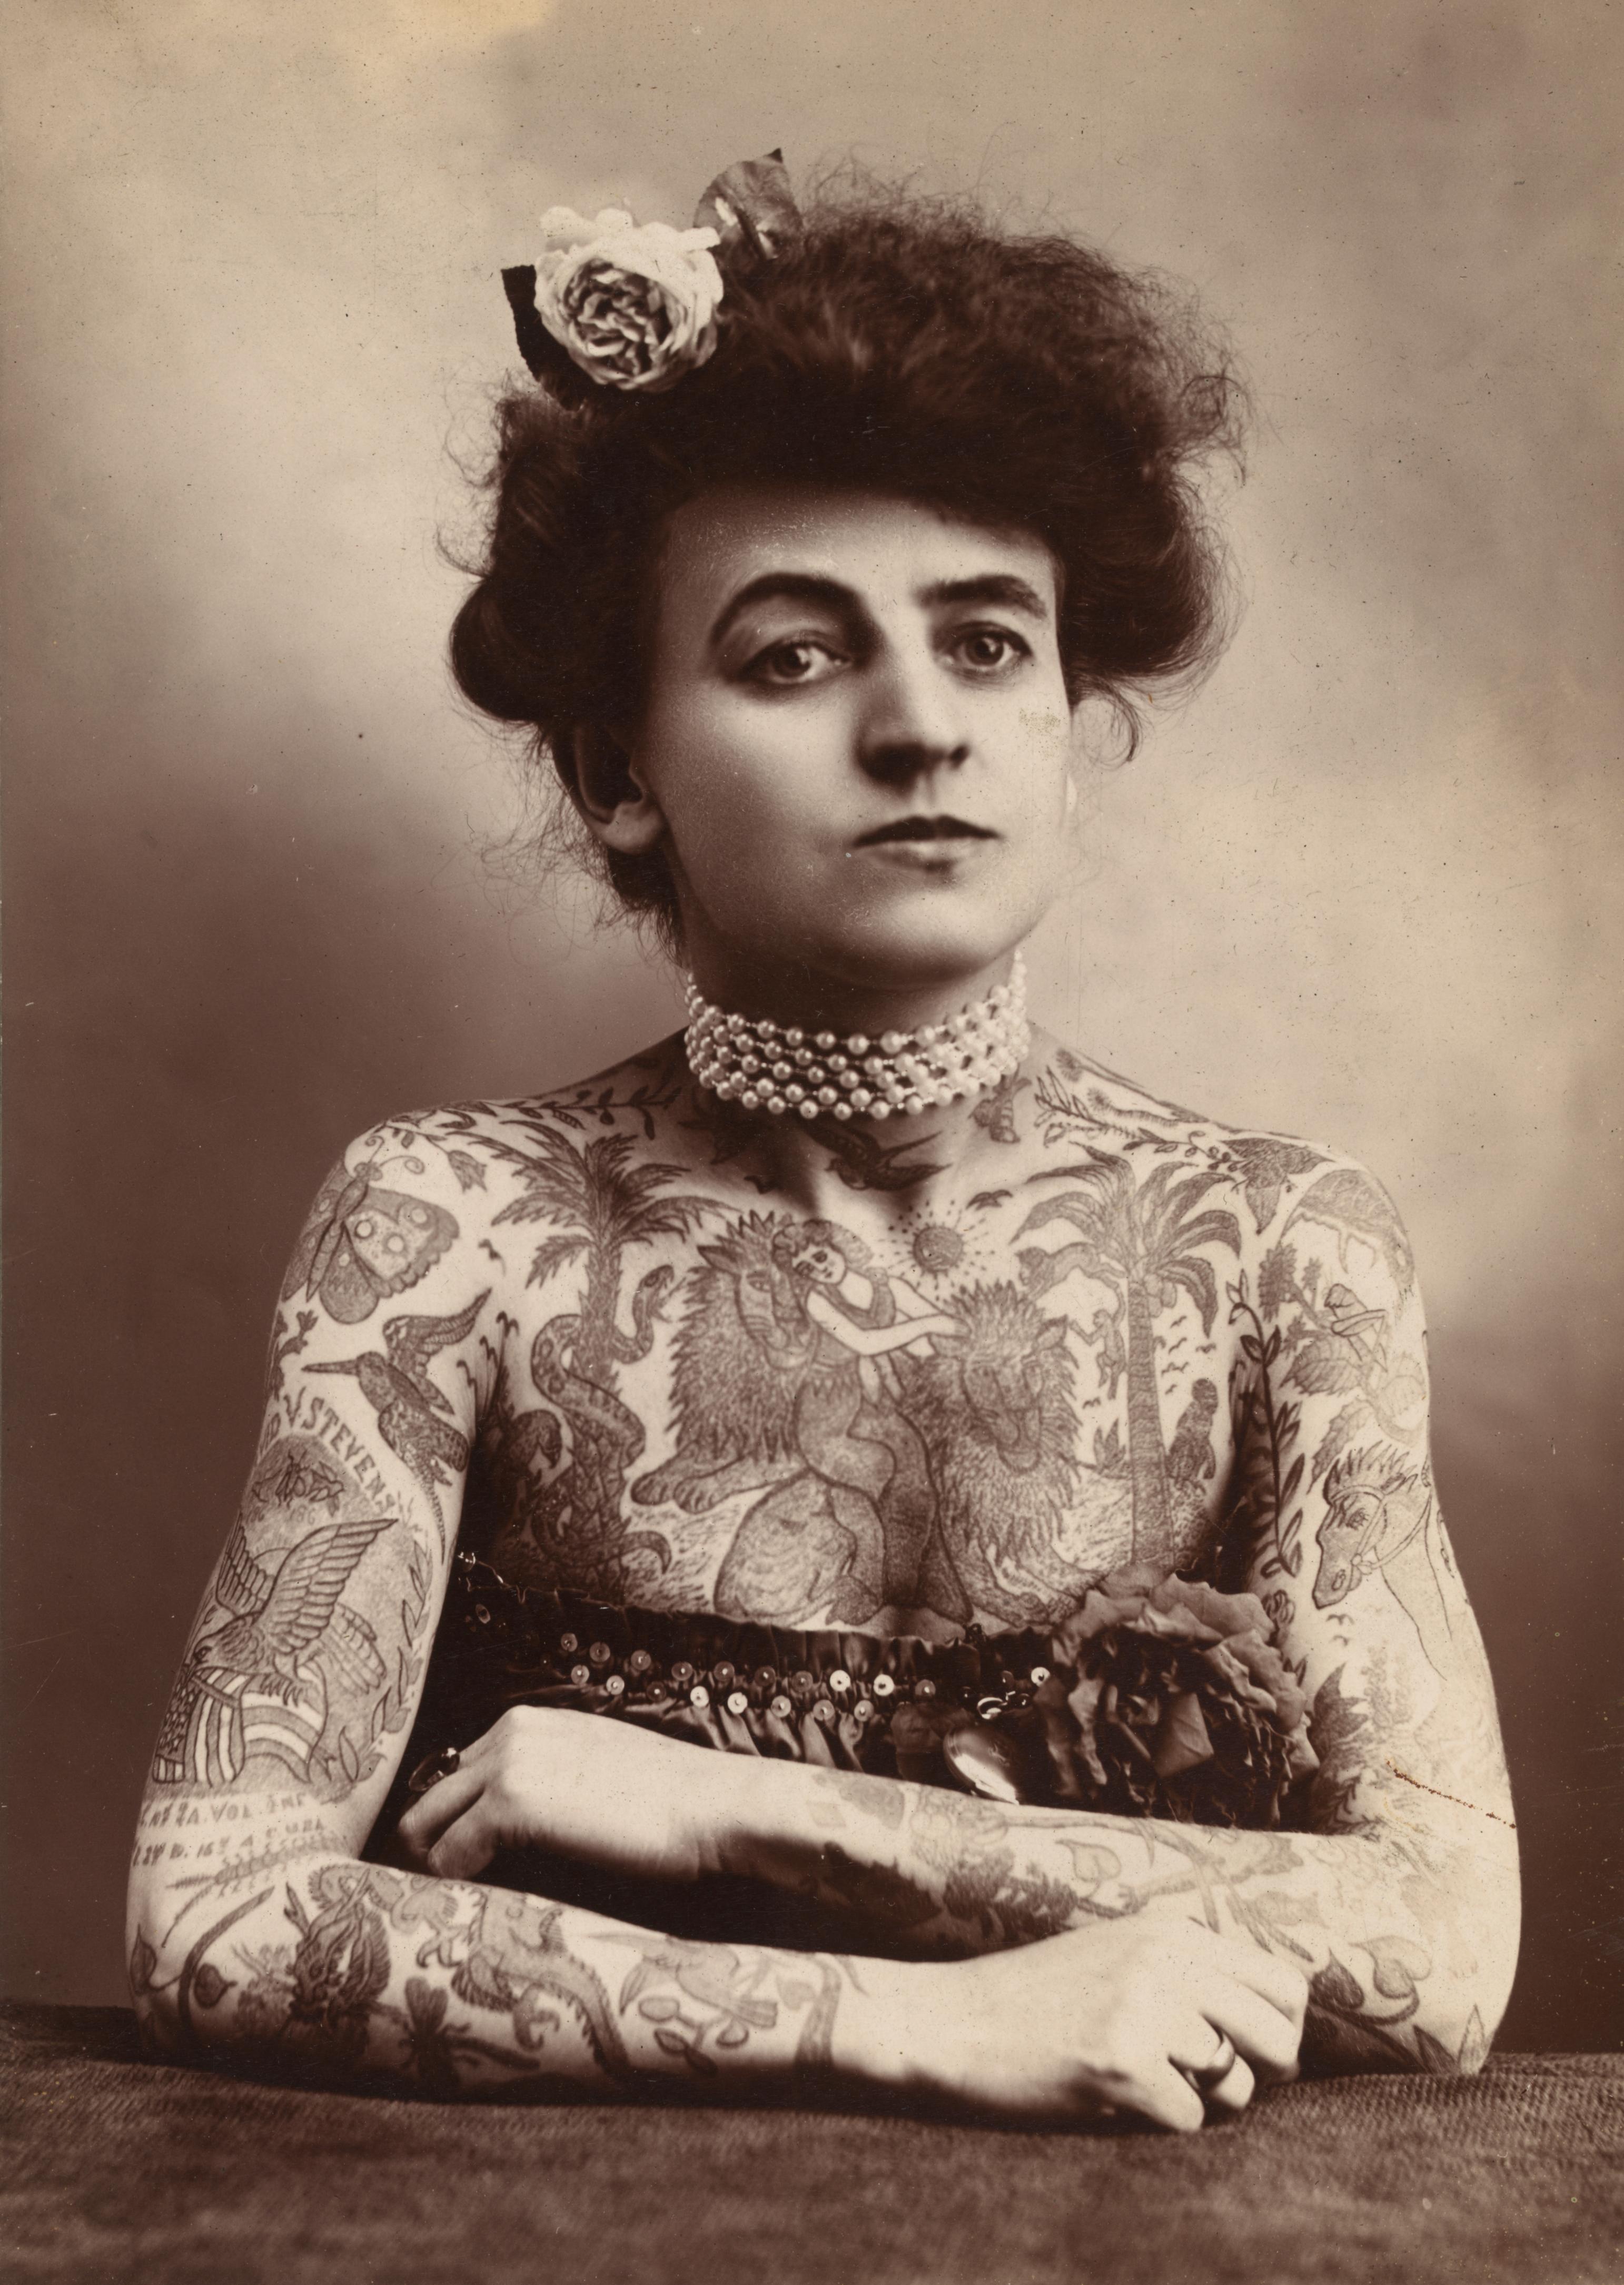 16. Maud Stevens Wagner - the first known female tattoo artist in the United States 1907